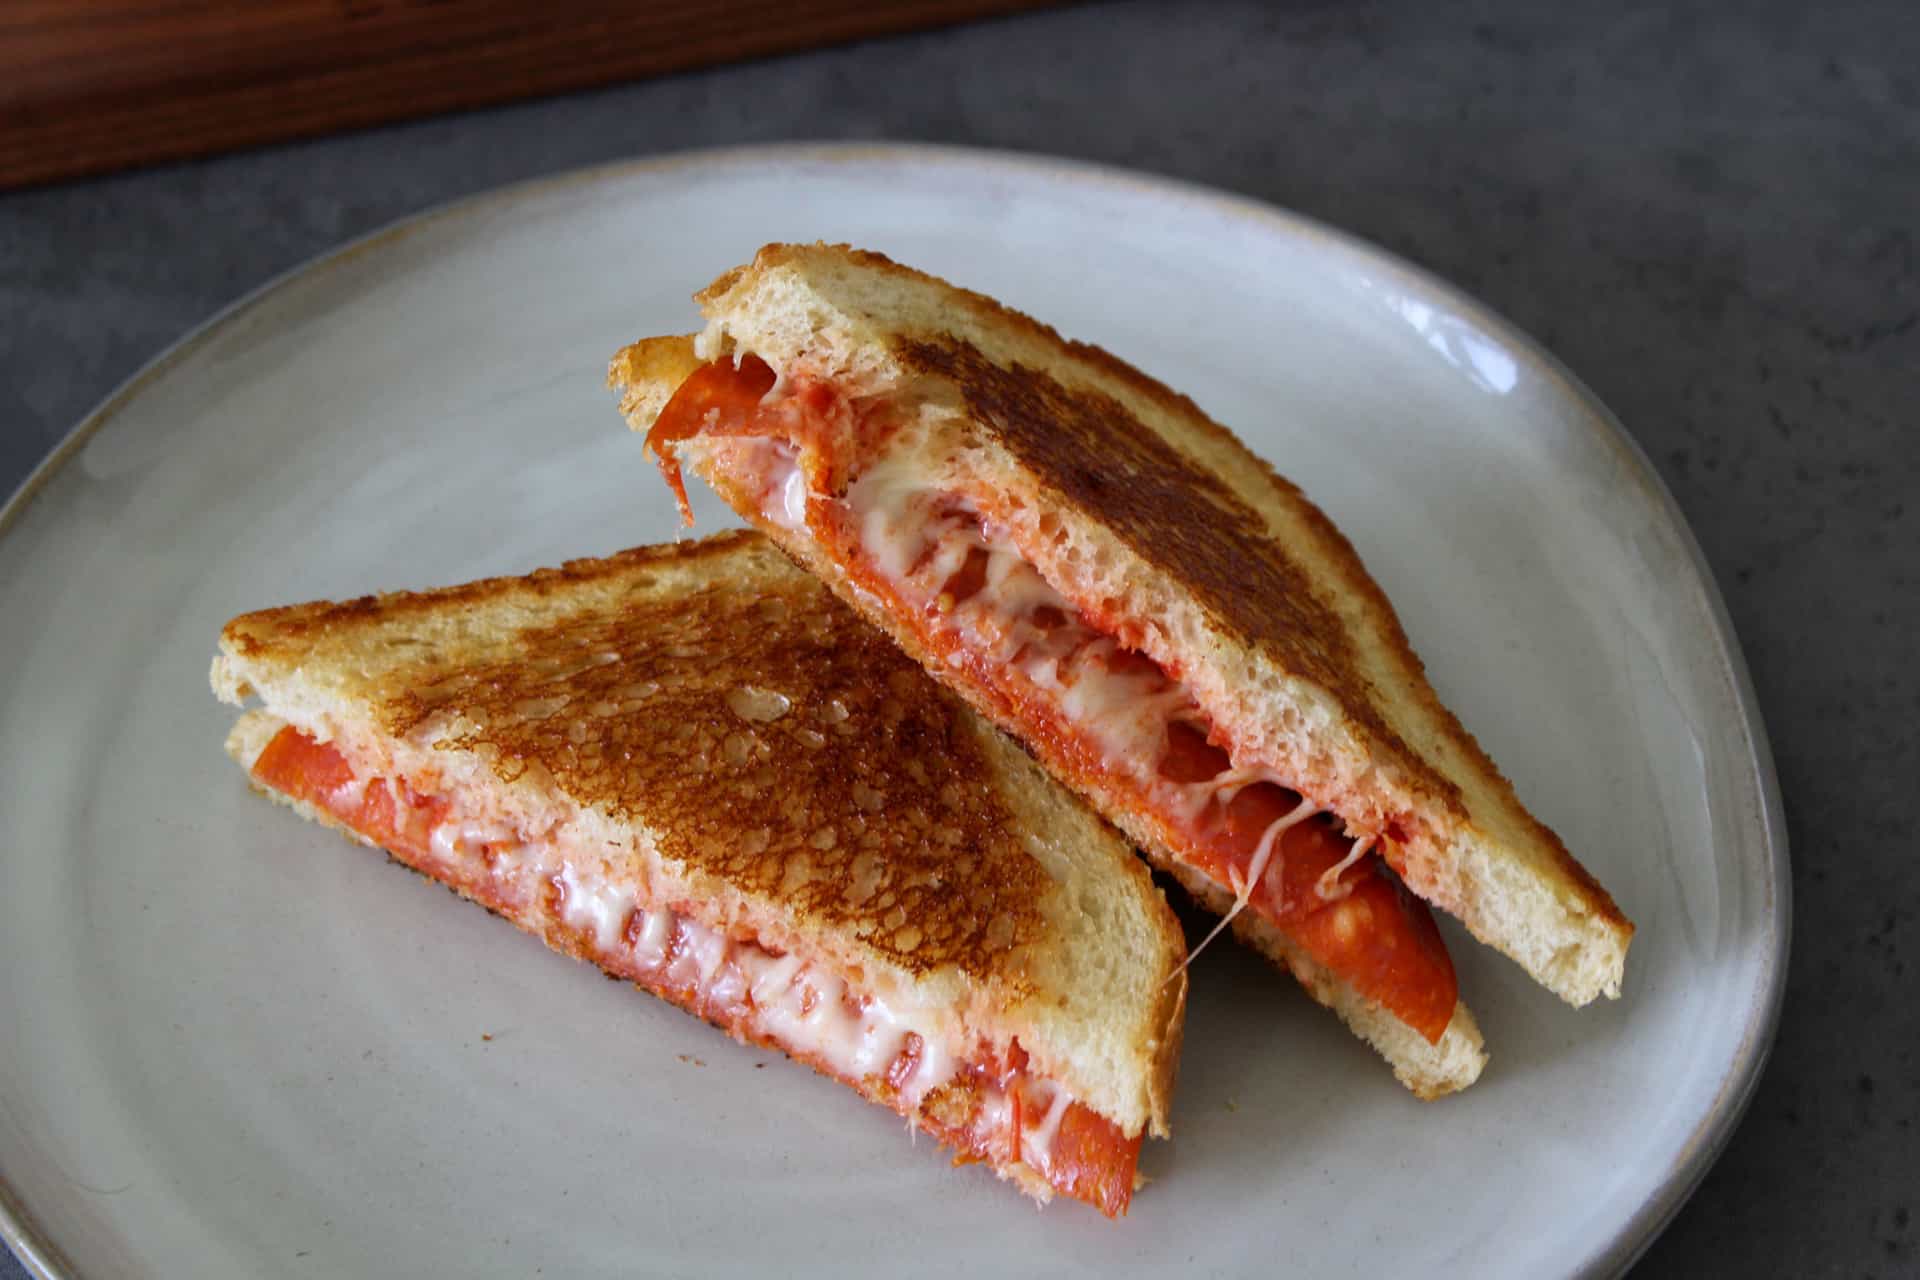 A cheesy pepperoni pizza panini sliced in half and stacked on a plate